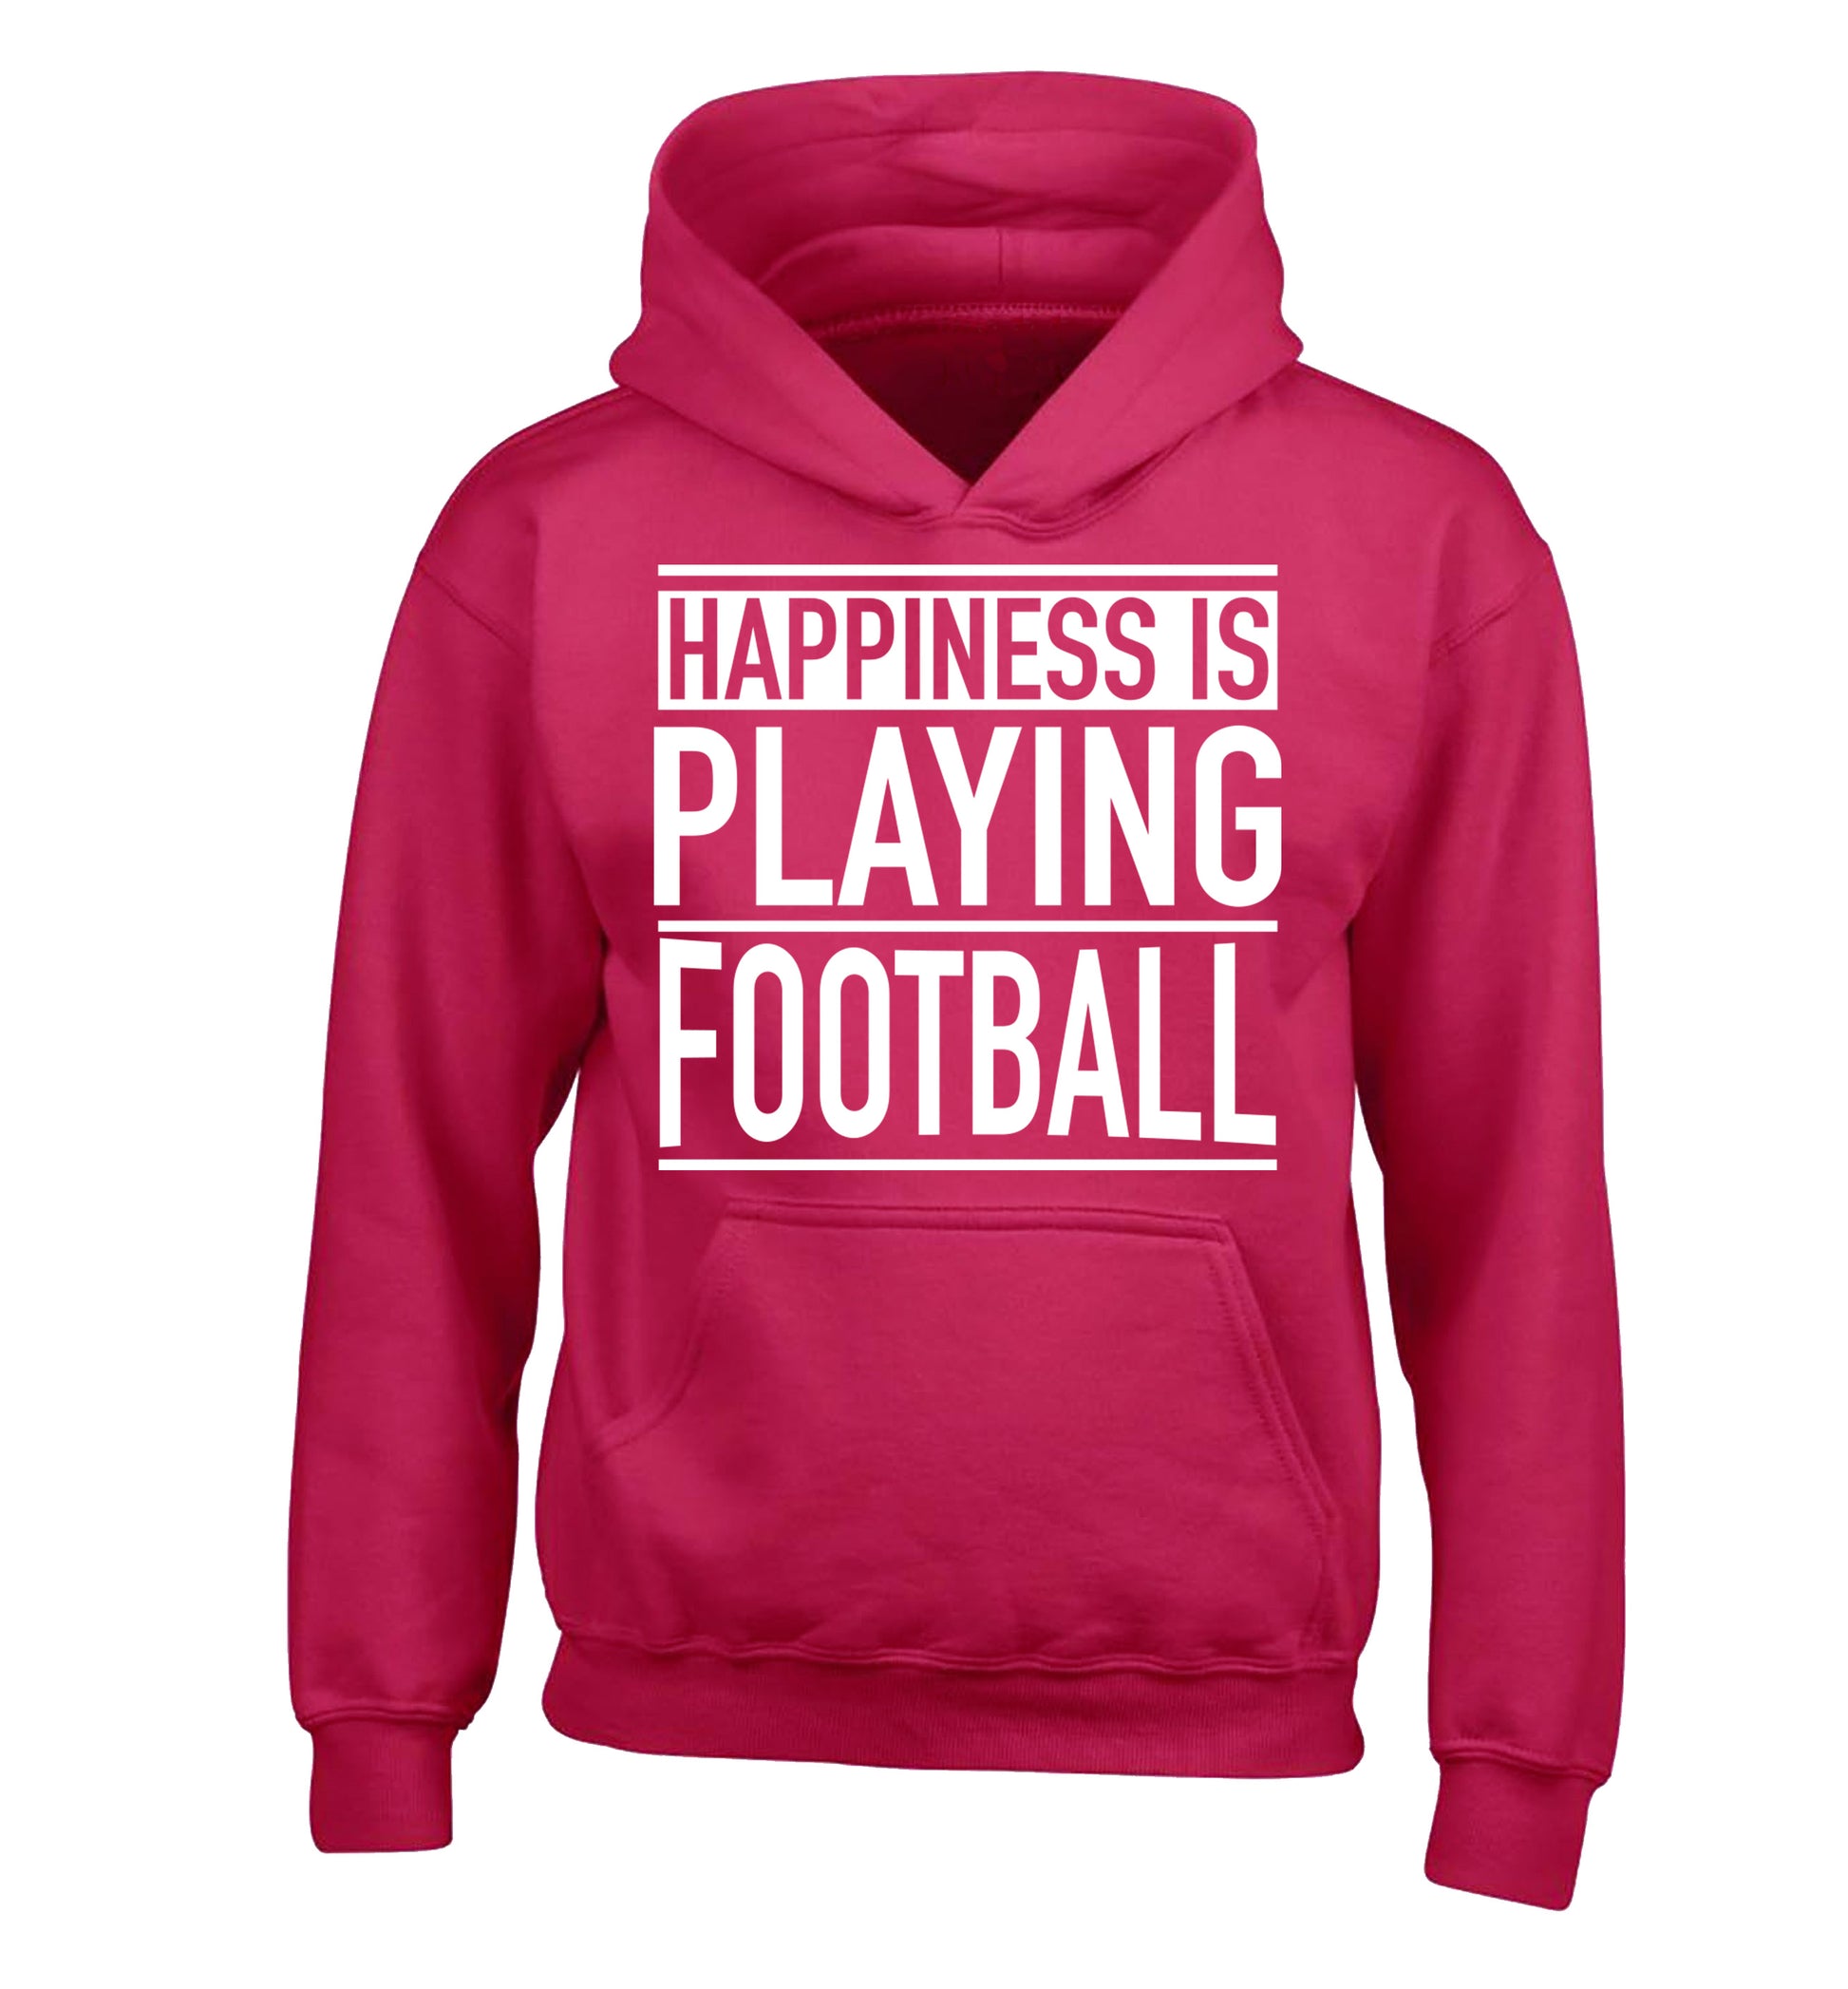 Happiness is playing football children's pink hoodie 12-14 Years